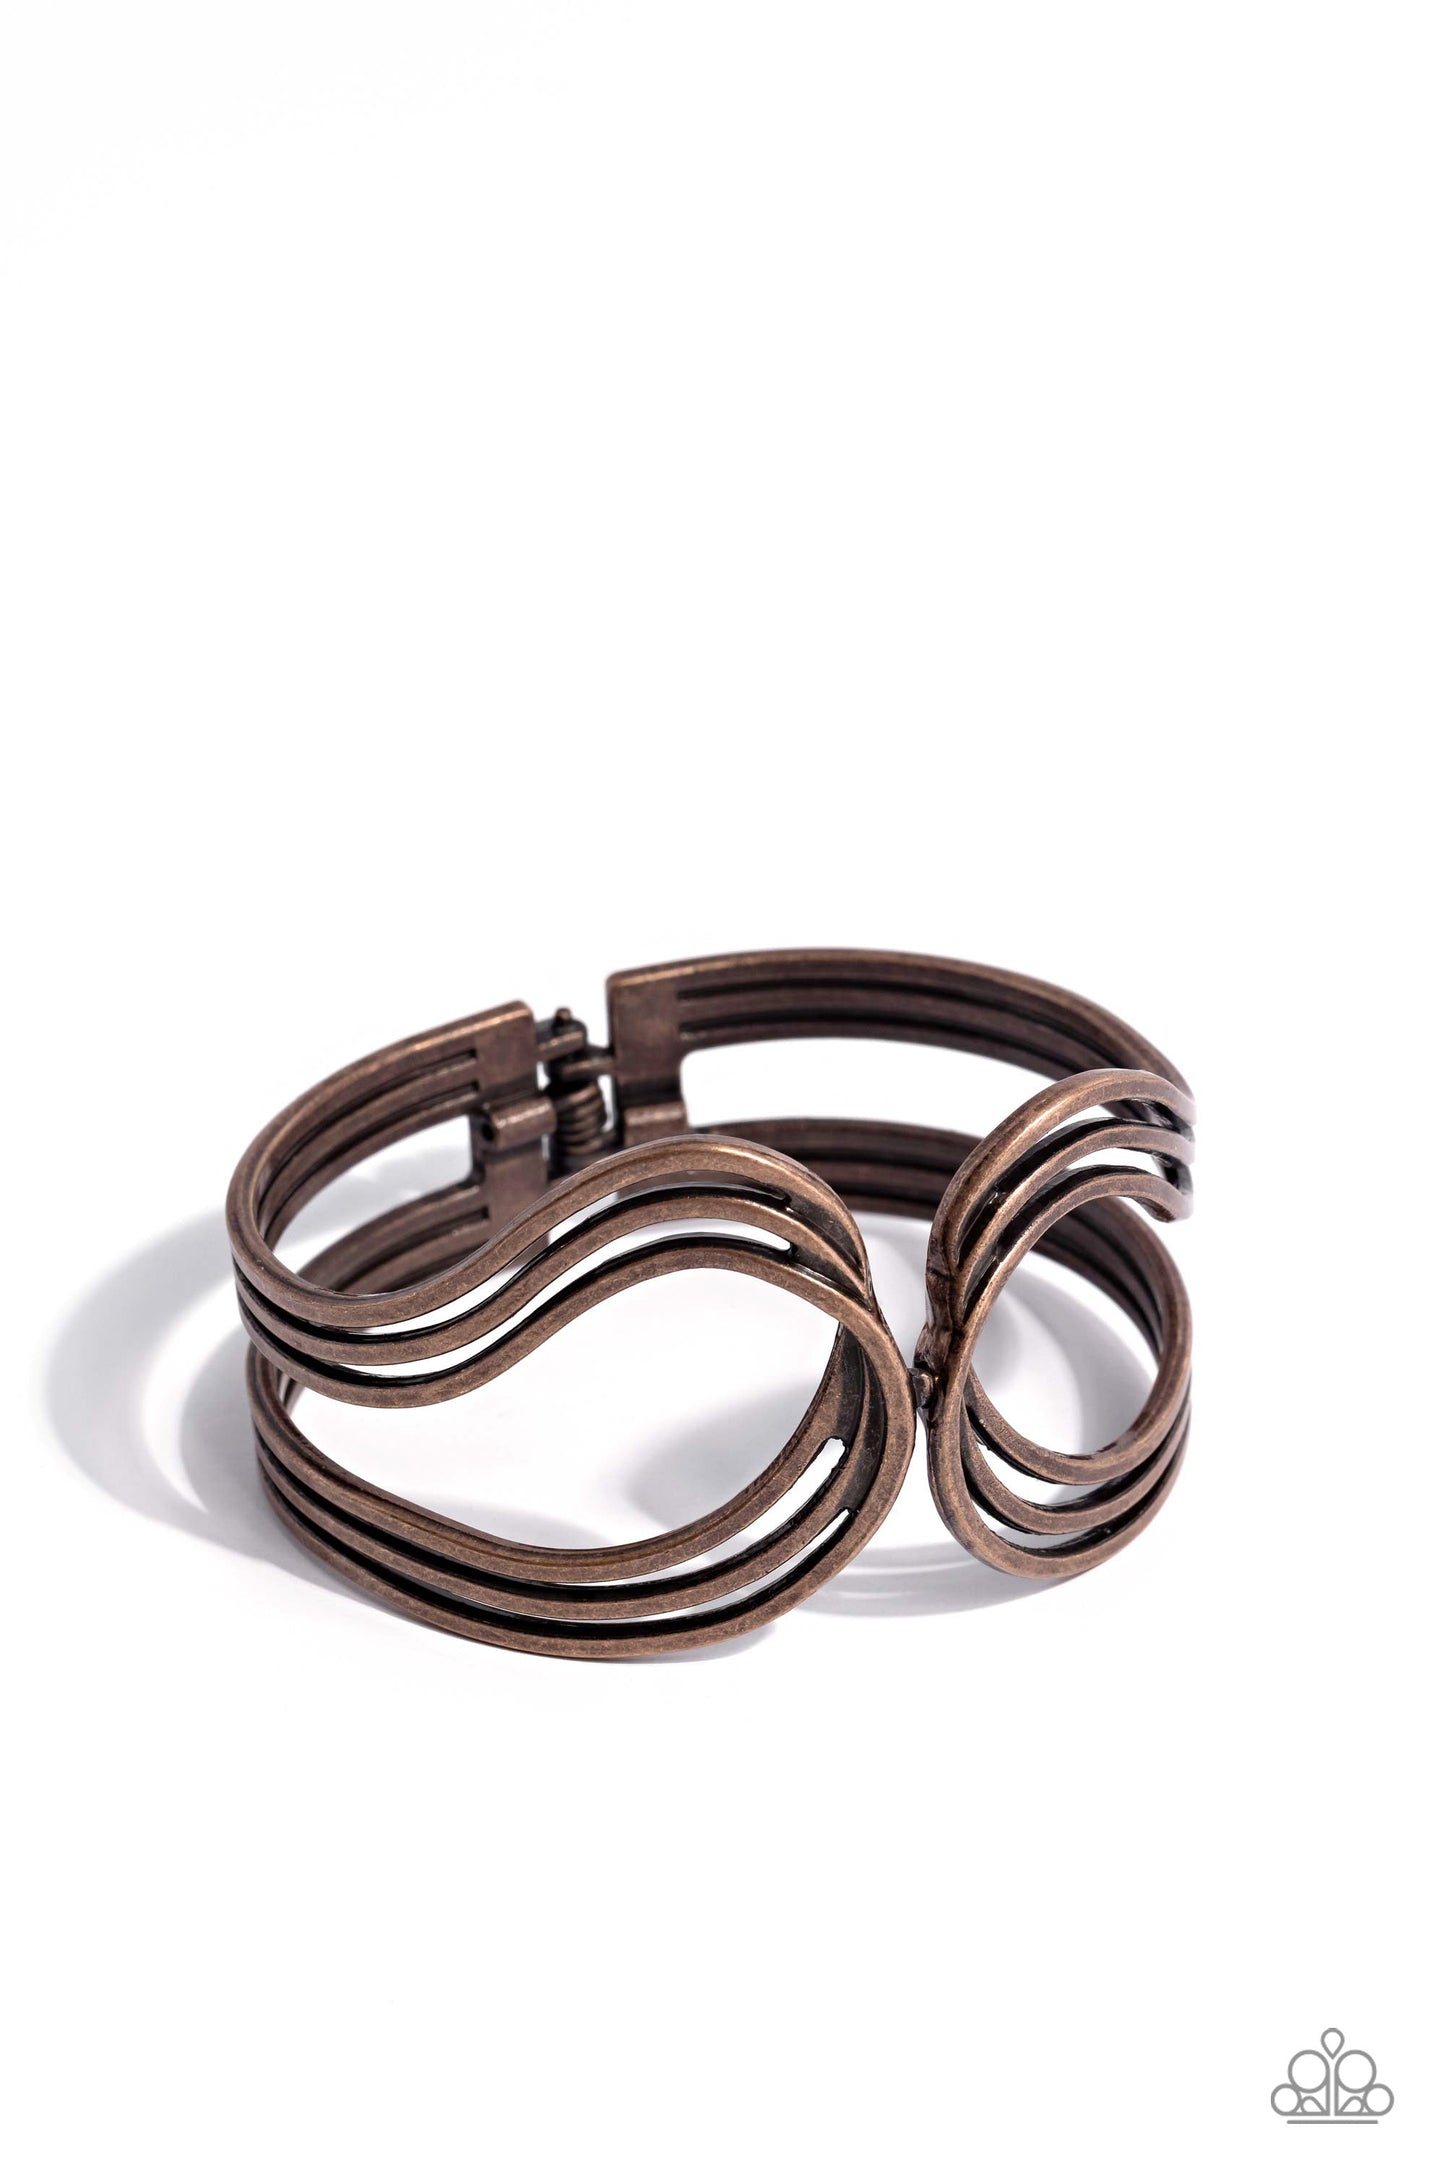 Shockwave Attitude - Copper Cuff Bracelet - Paparazzi Accessories - Featuring a rustic finish, flat copper bars delicately loop and overlap into two airy copper frames around the wrist that delicately connect into a layered bangle-like bracelet. Features a hinged closure. Sold as one individual bracelet.